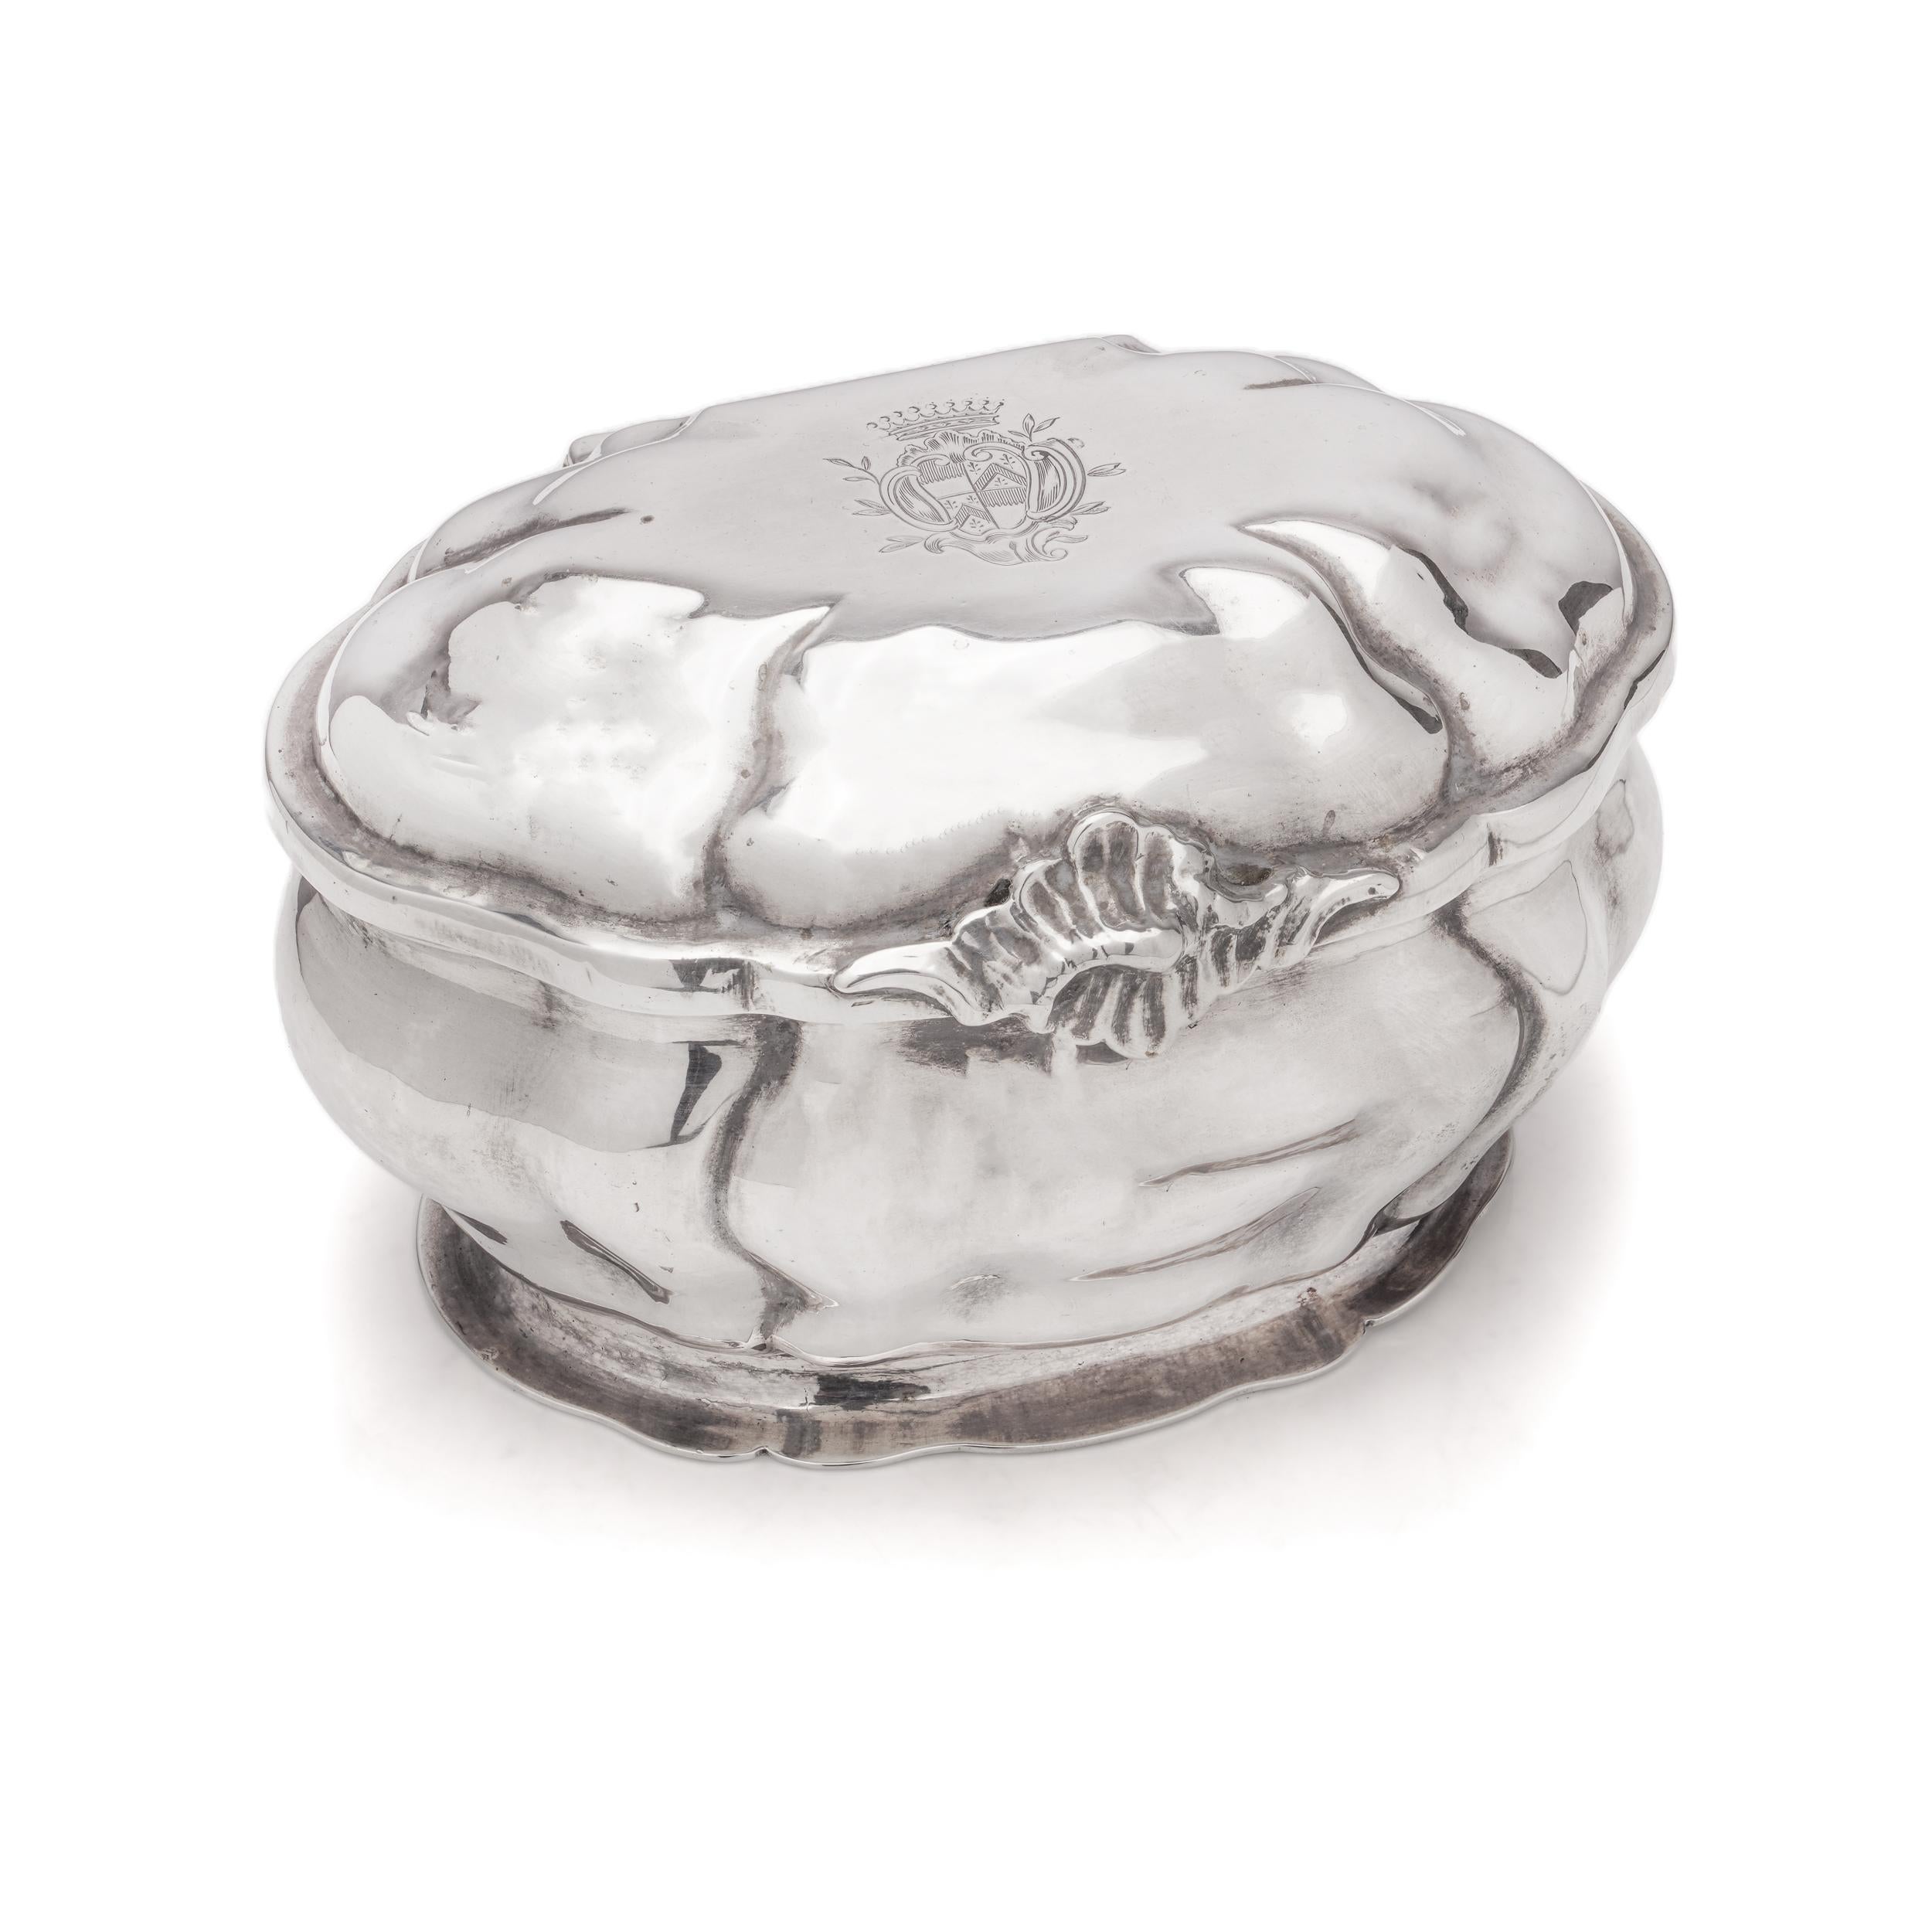 Antique 19th century 800. German silver small oval Tea Caddy with Hanau marks In Good Condition For Sale In Braintree, GB